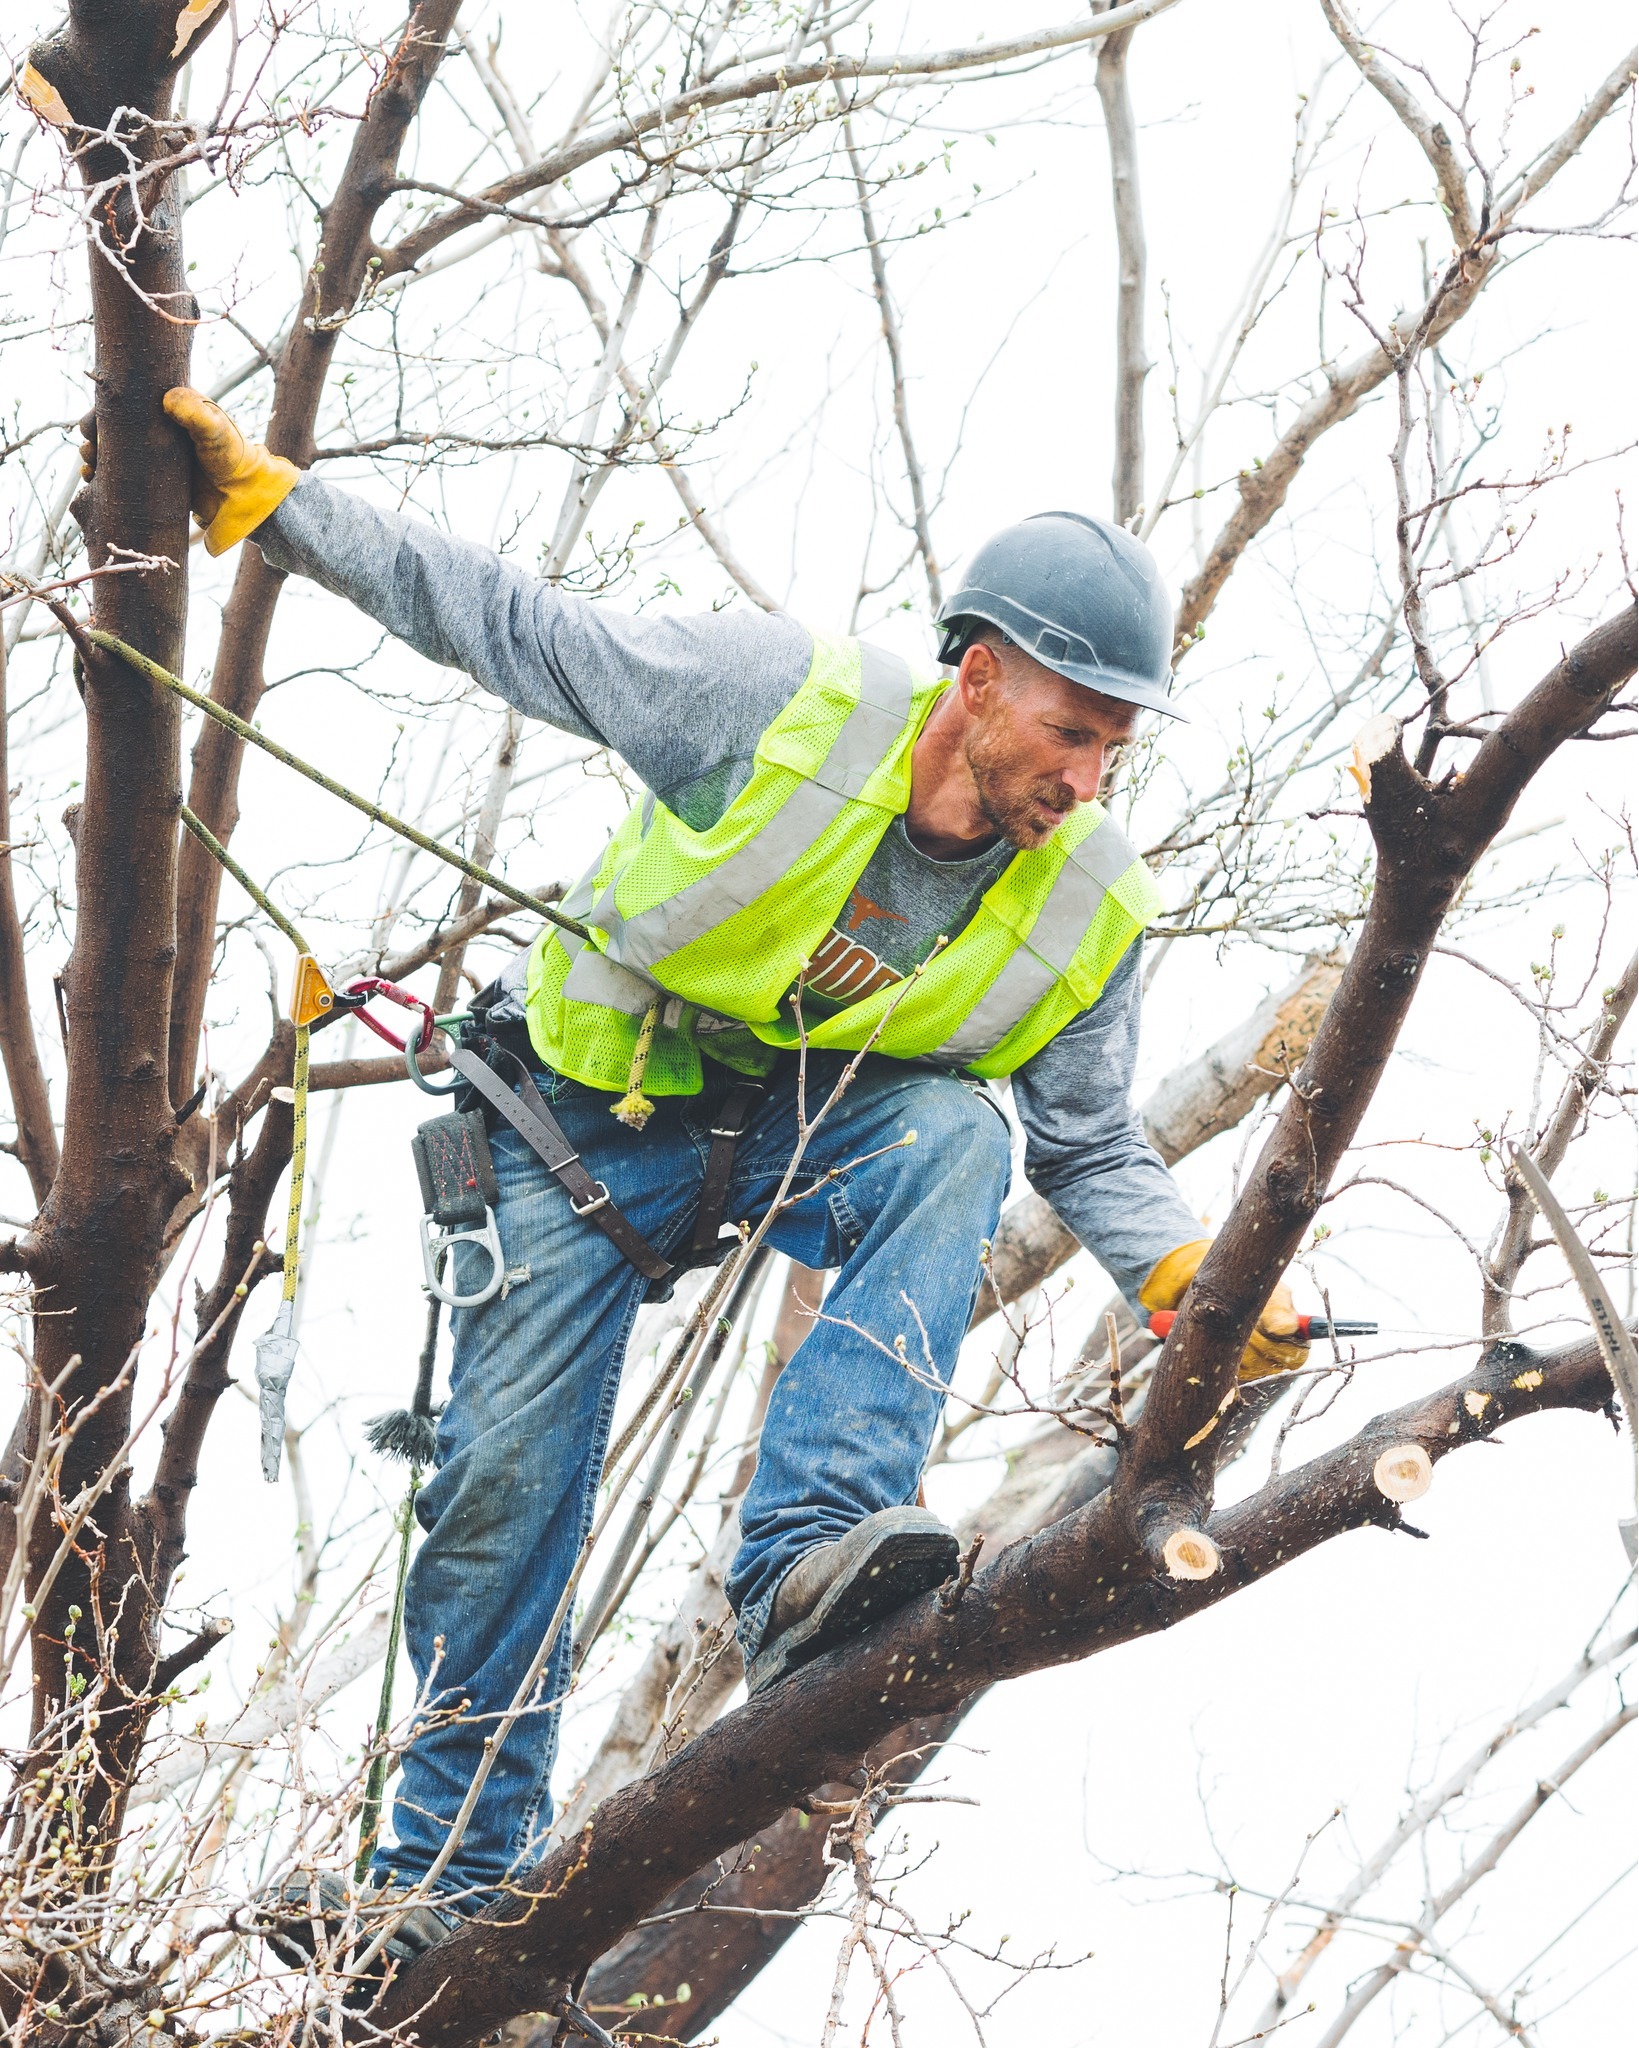 Pruning trees is an art and Eternal Tree's arborists are artists.